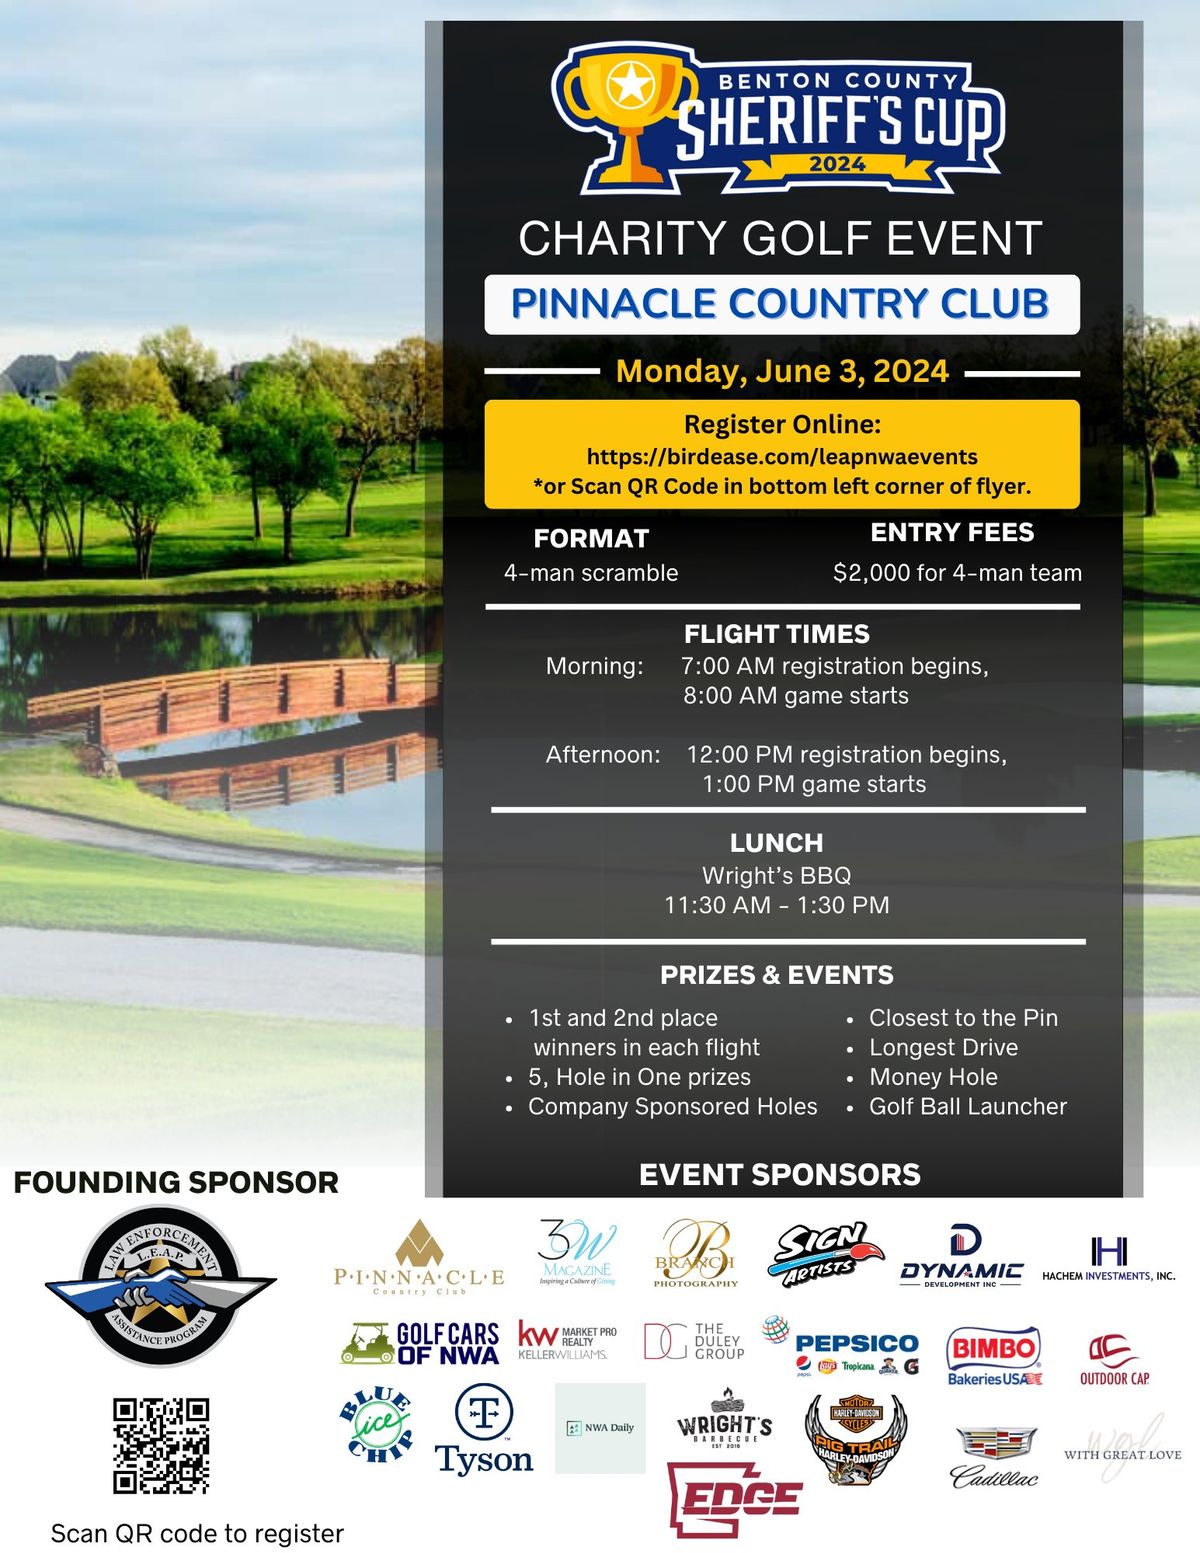 Benton County Sheriff's Cup Charity Golf Event